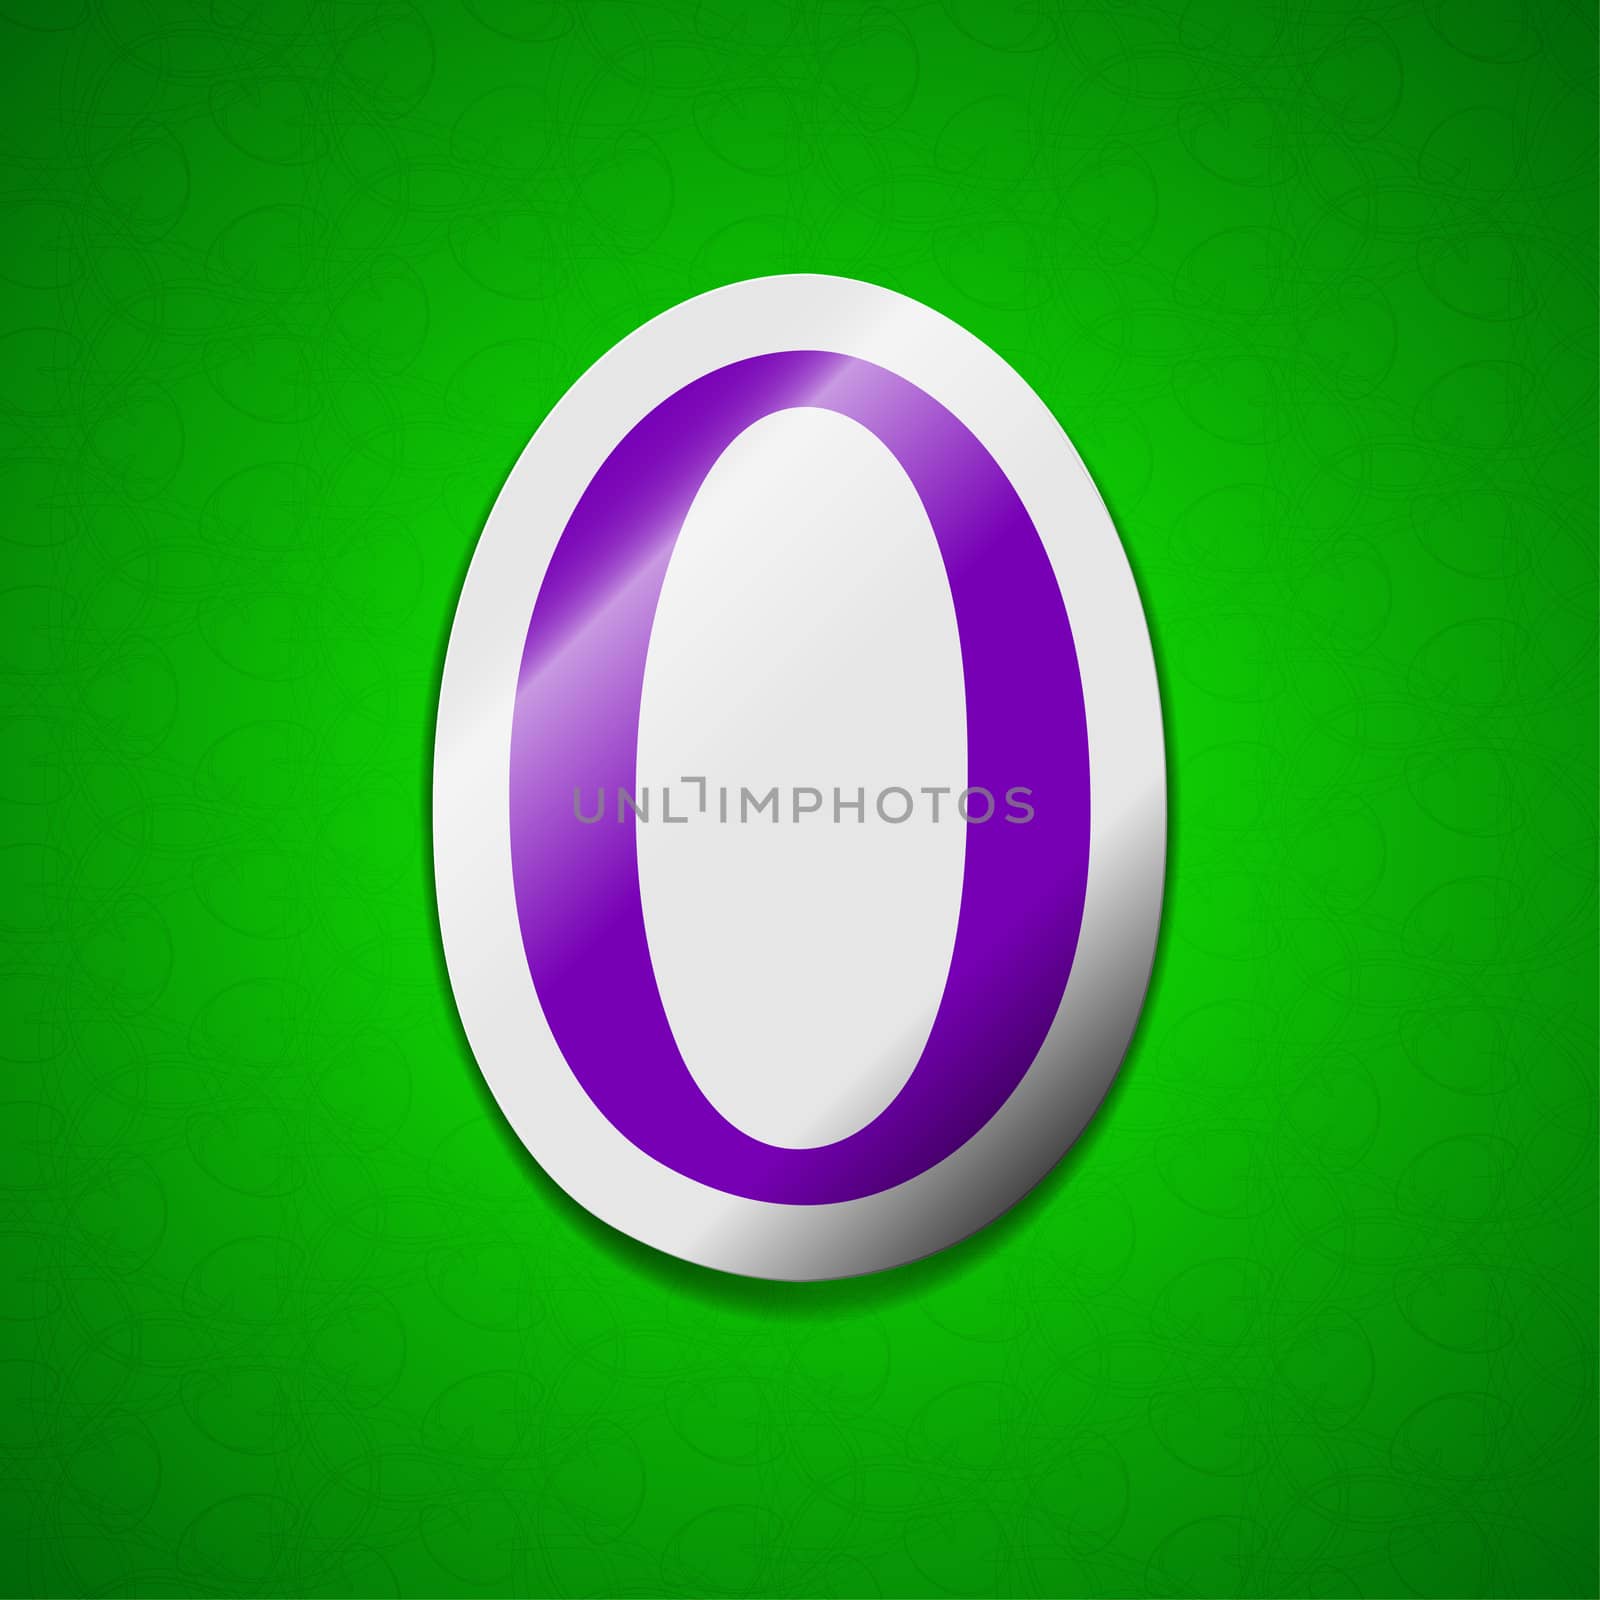 zero icon sign. Symbol chic colored sticky label on green background.  illustration